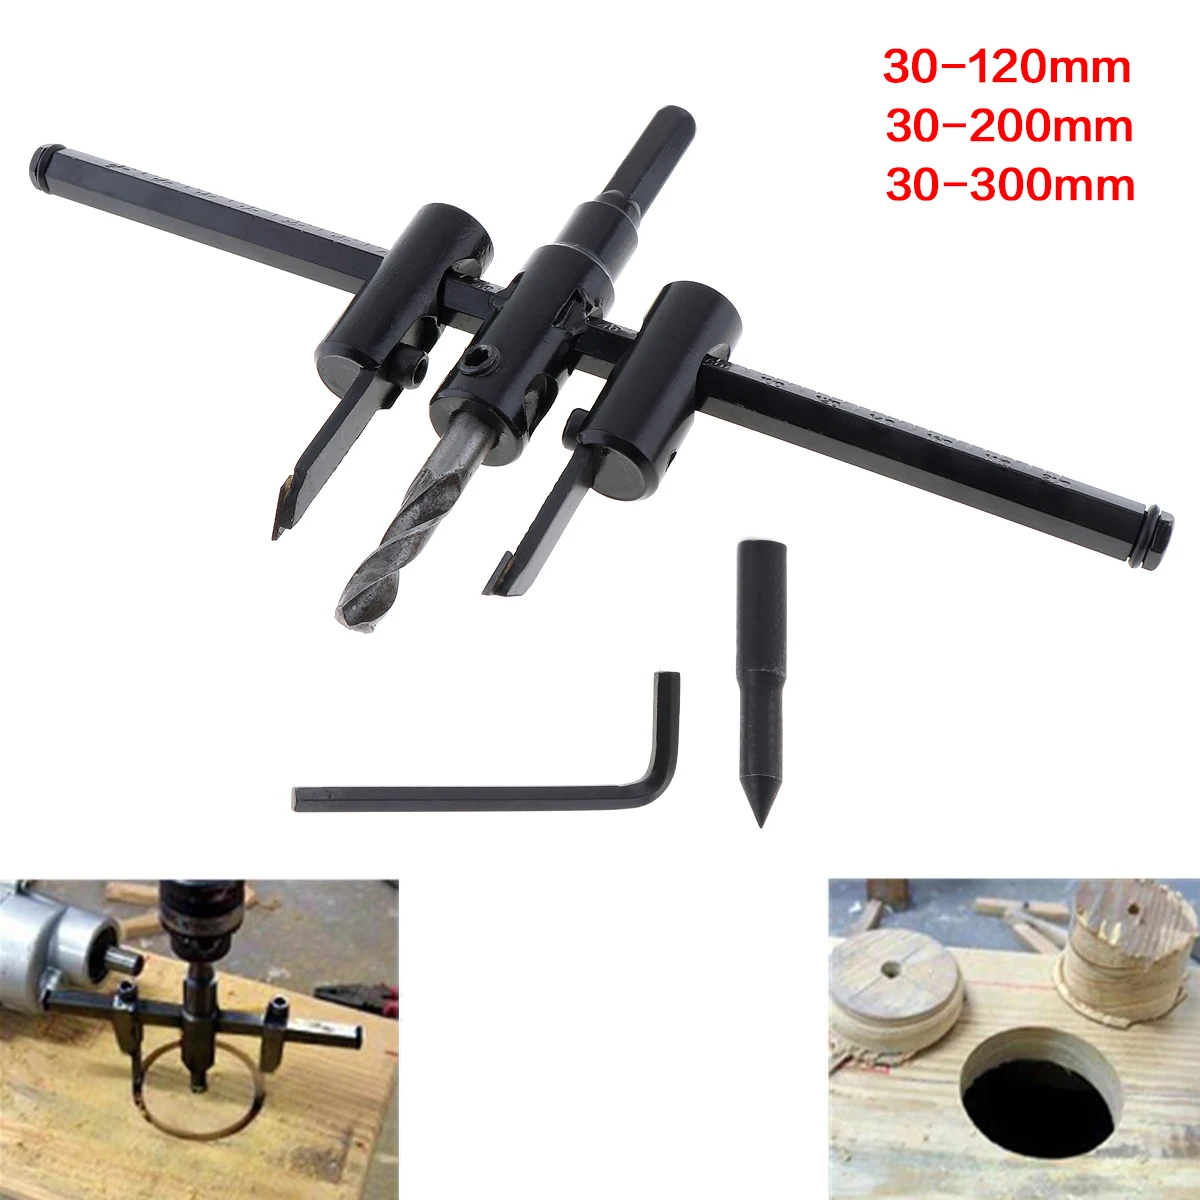 Adjustable Circle Hole Cutter Wood Drill Bit Saw Round Cutting Blade Aircraft Type DIY Tool Hole opener 30mm-200mm 30mm-300mm